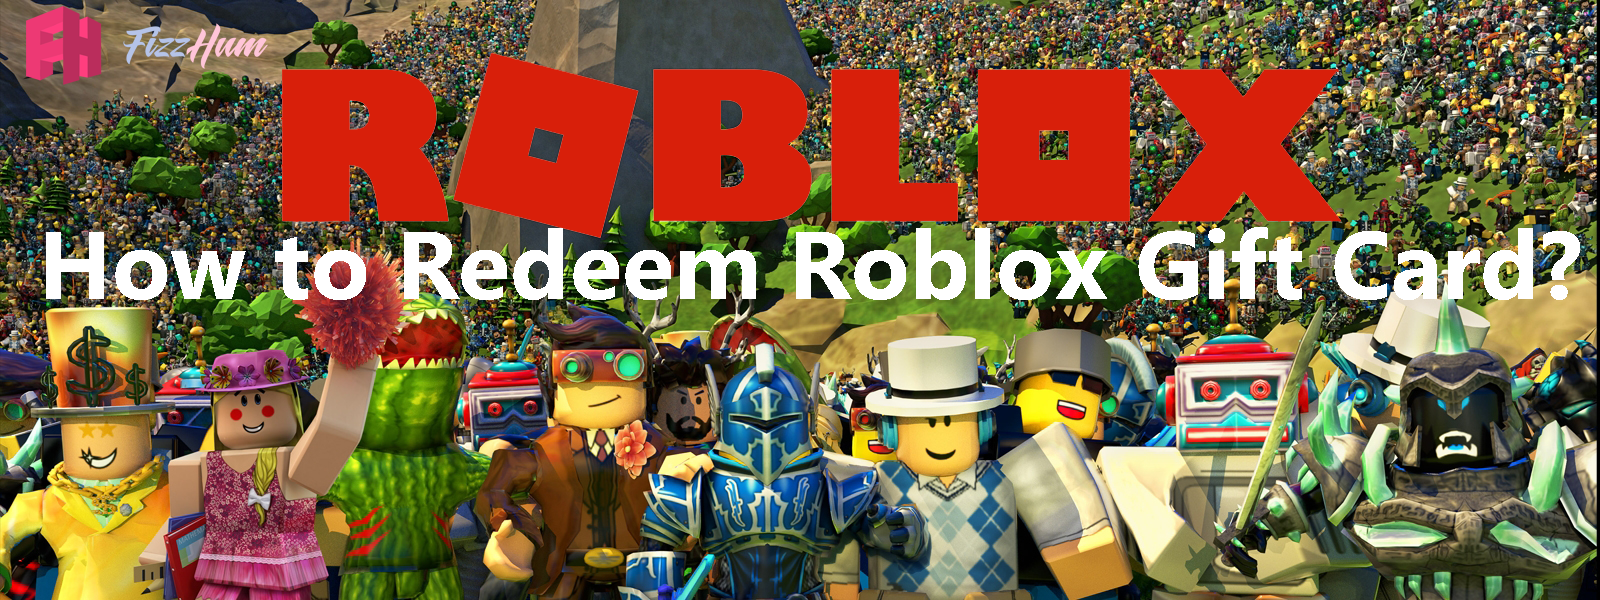 How To Redeem Roblox Gift Card Step By Step 2021 Fizzhum Com - alia roblox